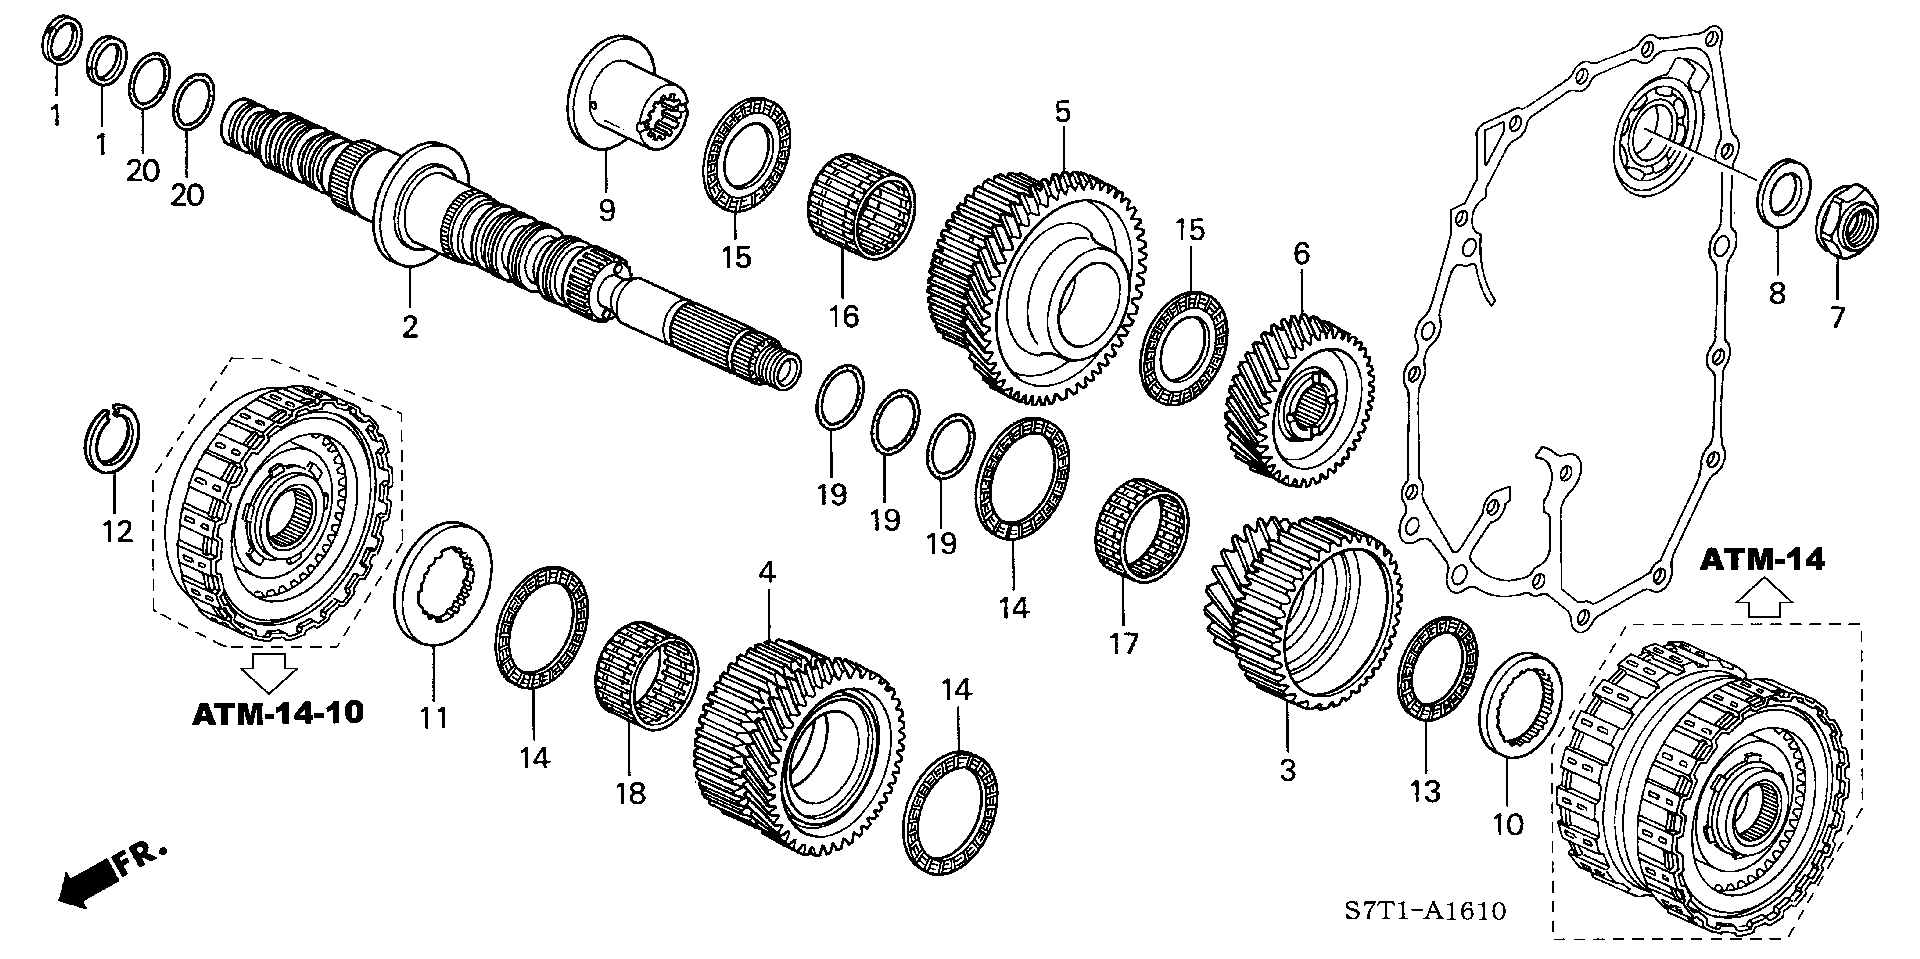 SECONDARY SHAFT(5AT)